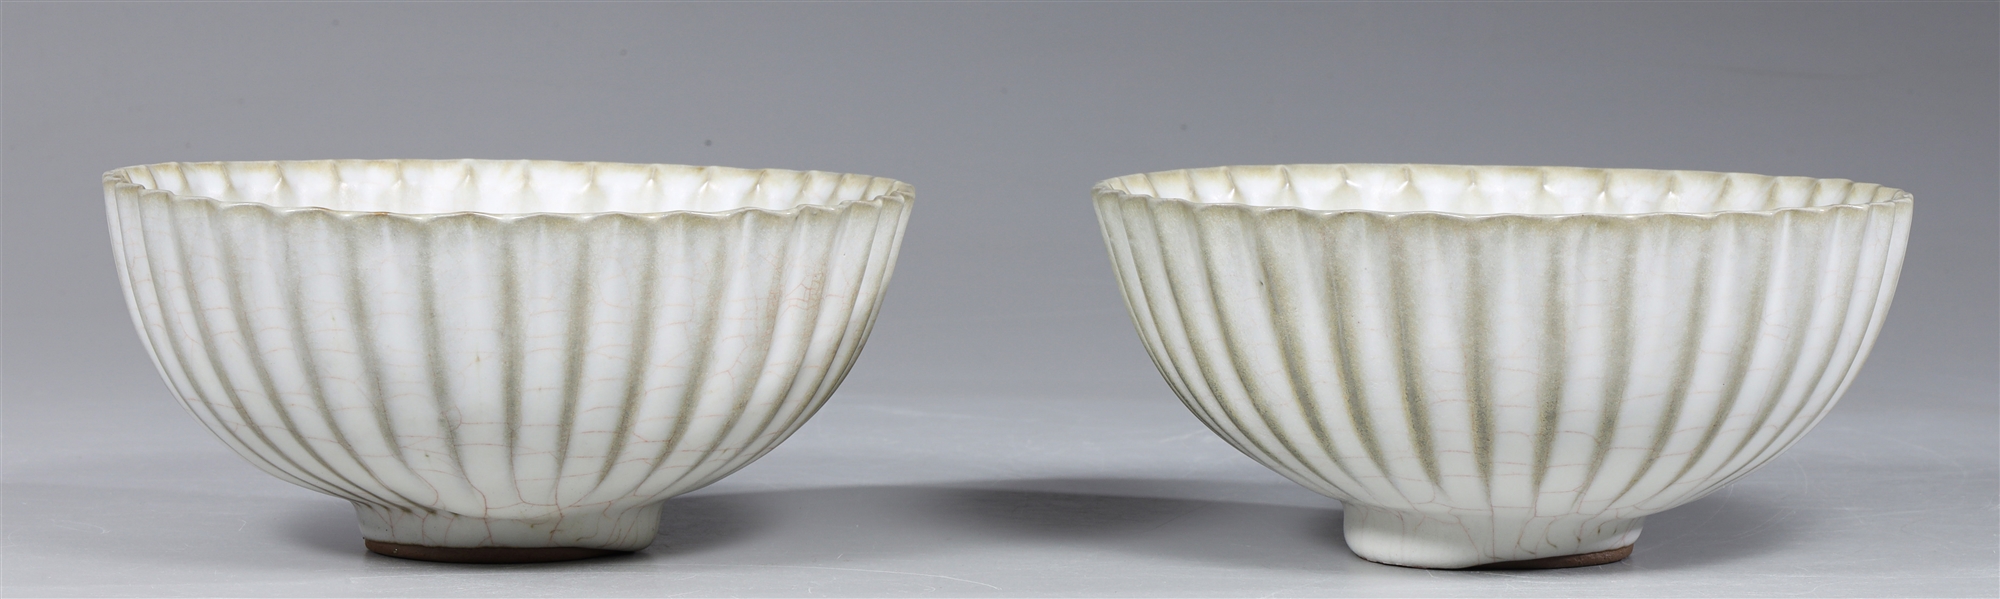 Pair Chinese crackle glazed bowls  2aa63d